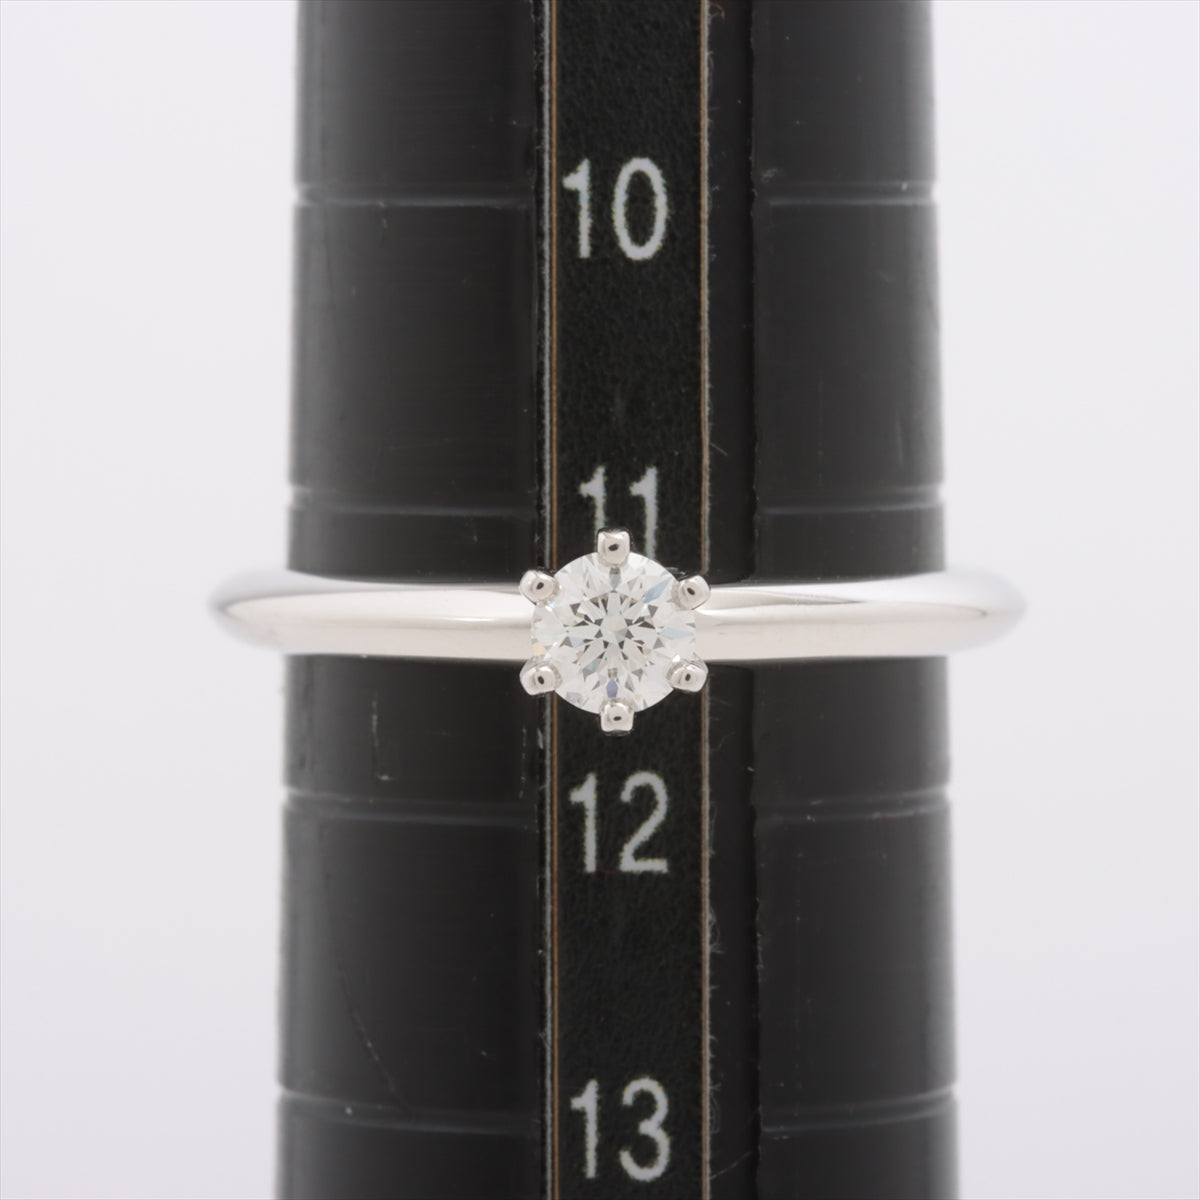 Tiffany Solitaire diamond rings Pt950 4.4g D0.22